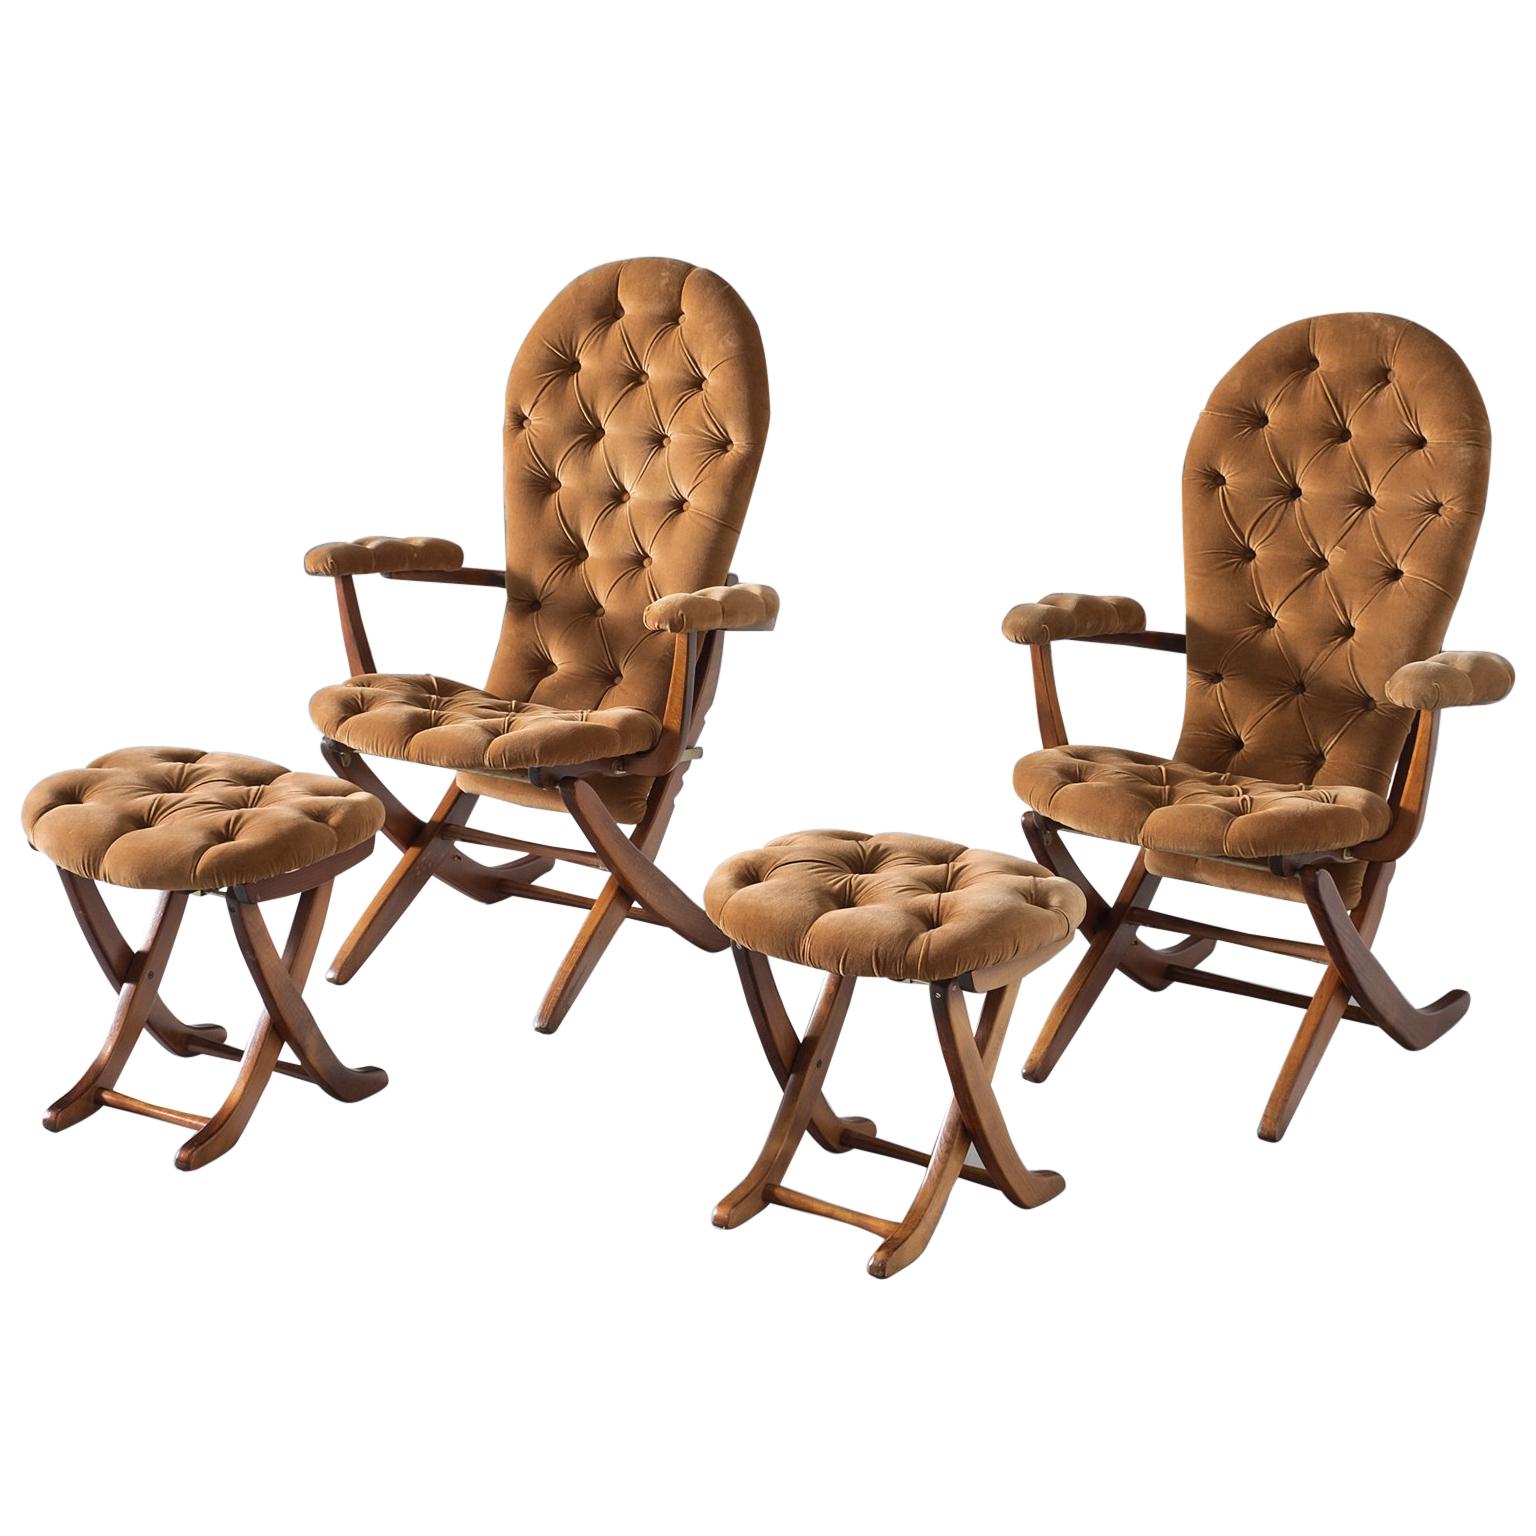 Pair of Adjustable Chairs with Ottoman